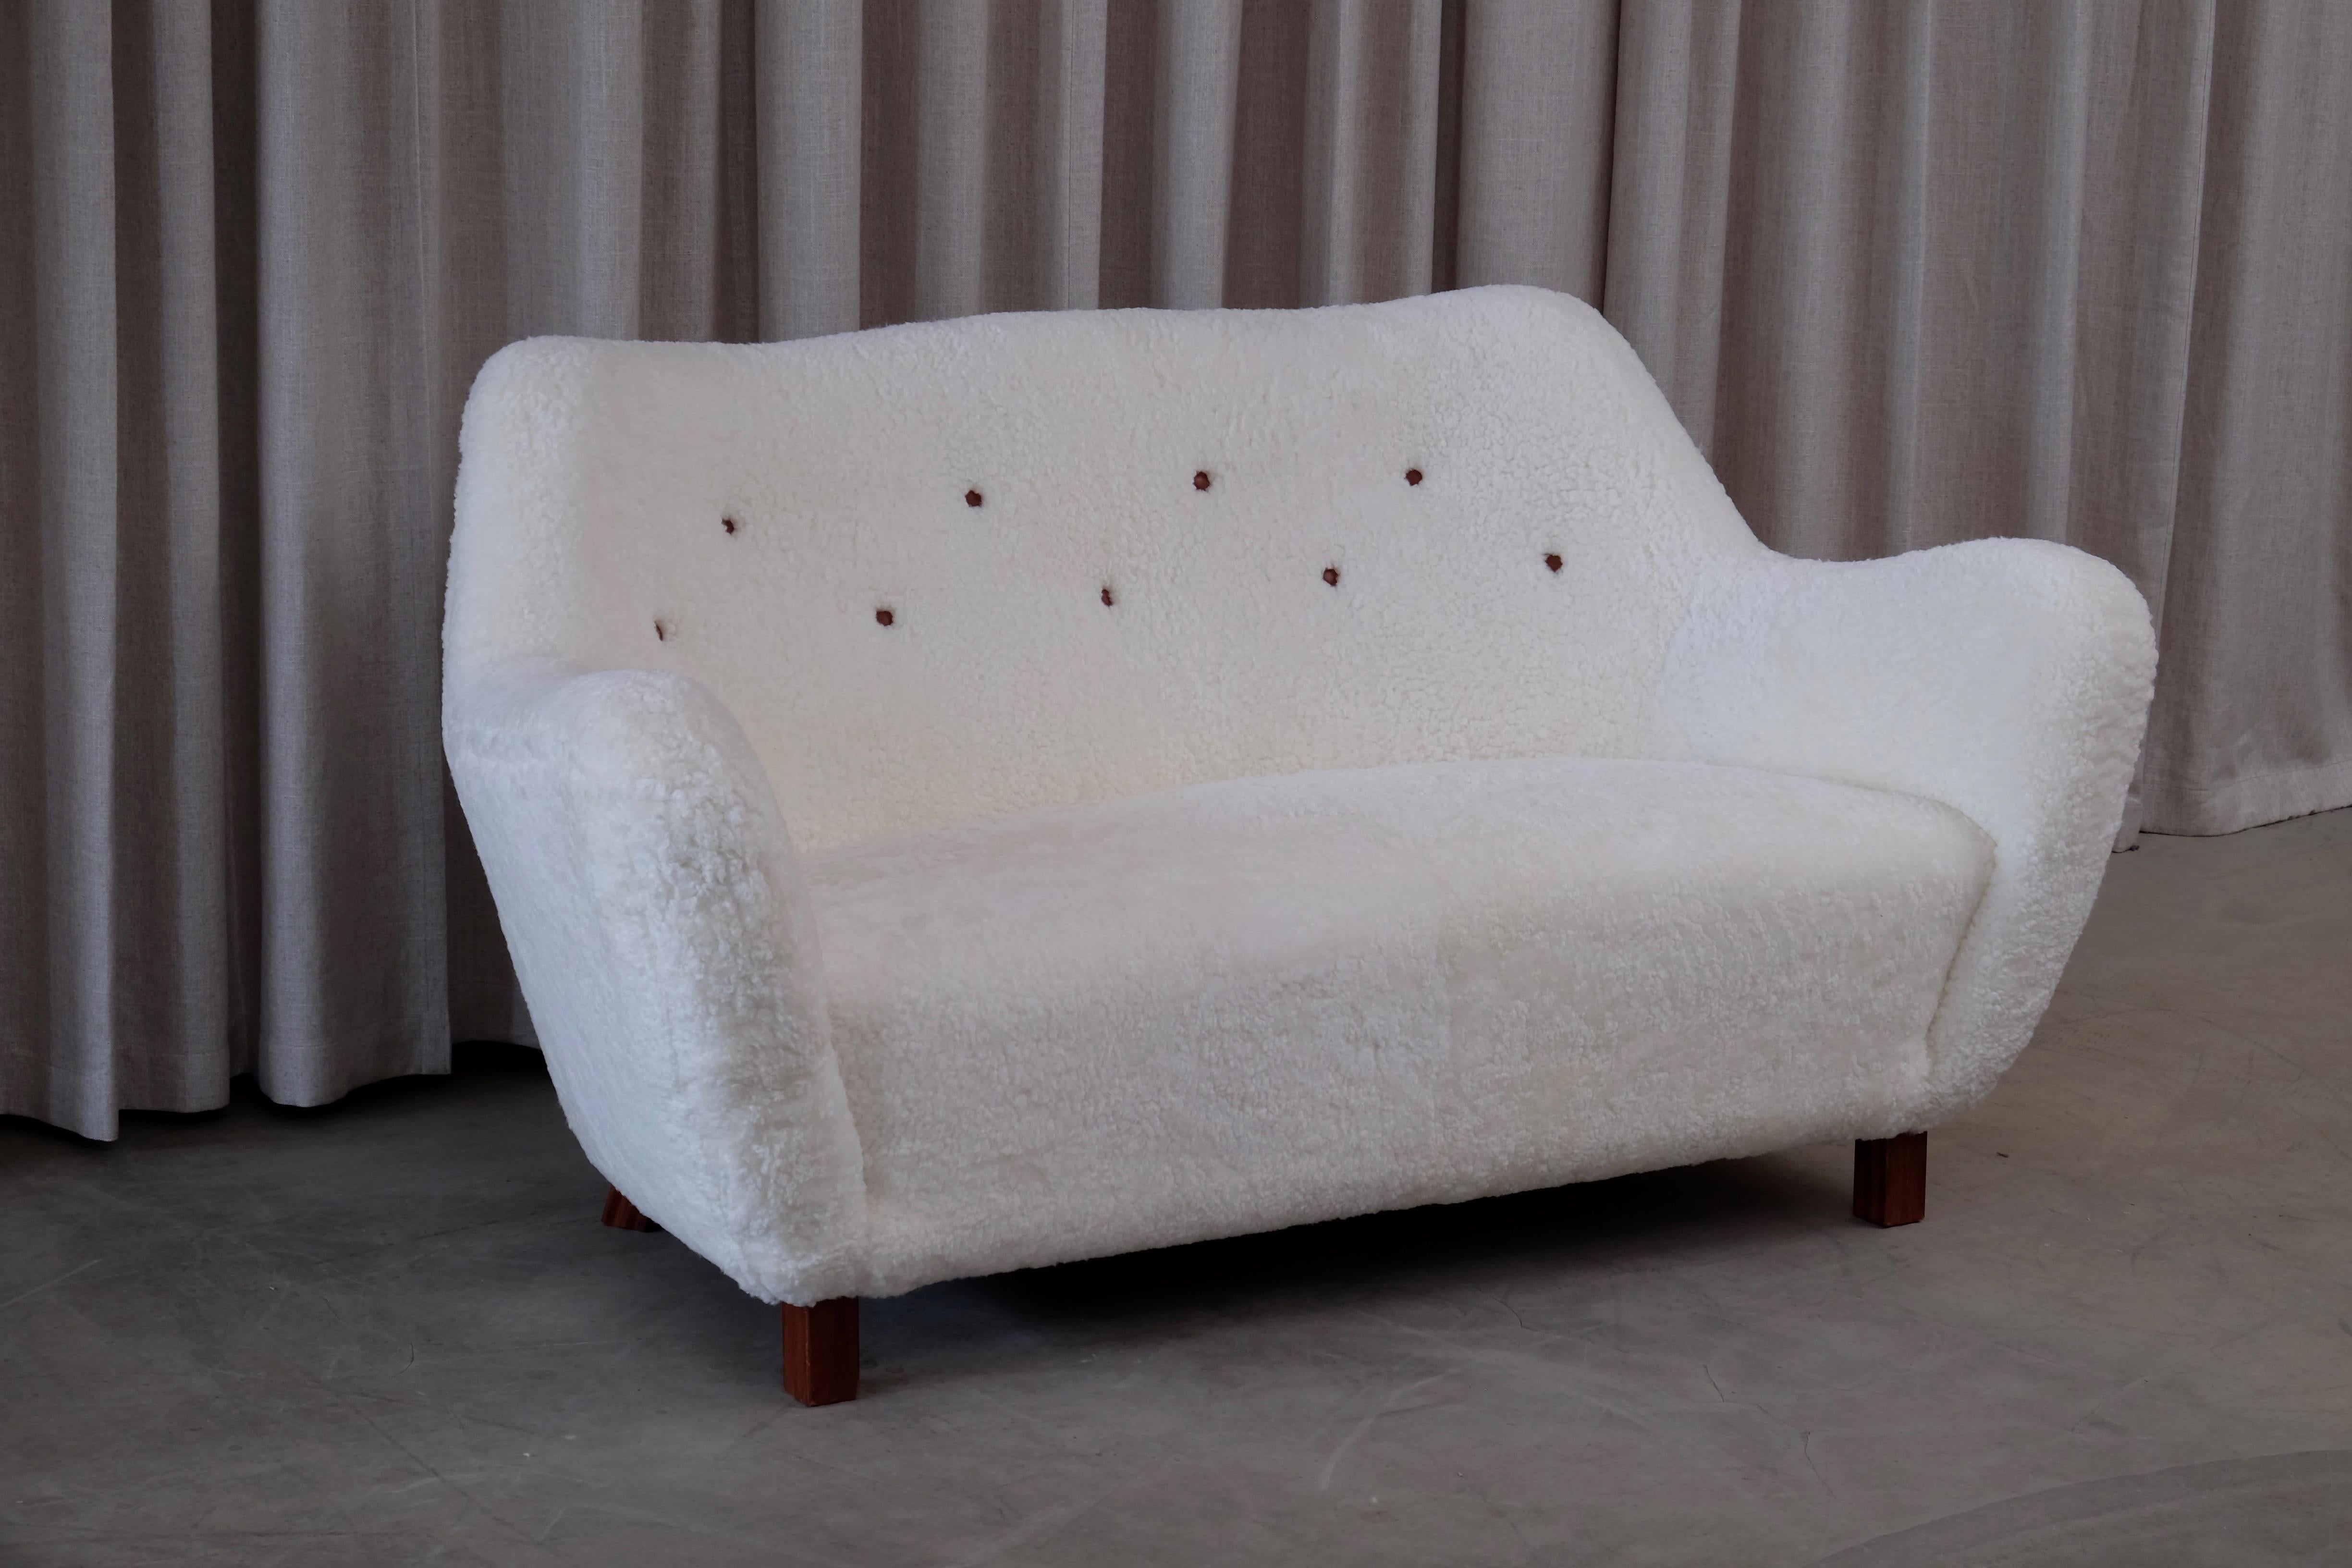 Reupholstered in white sheepskin from Skandilock.
Produced by Sten Wicéns Möbelfabrik, Sweden, 1950s.
Pair of matching easy chairs of the same model is also available.
Excellent condition.